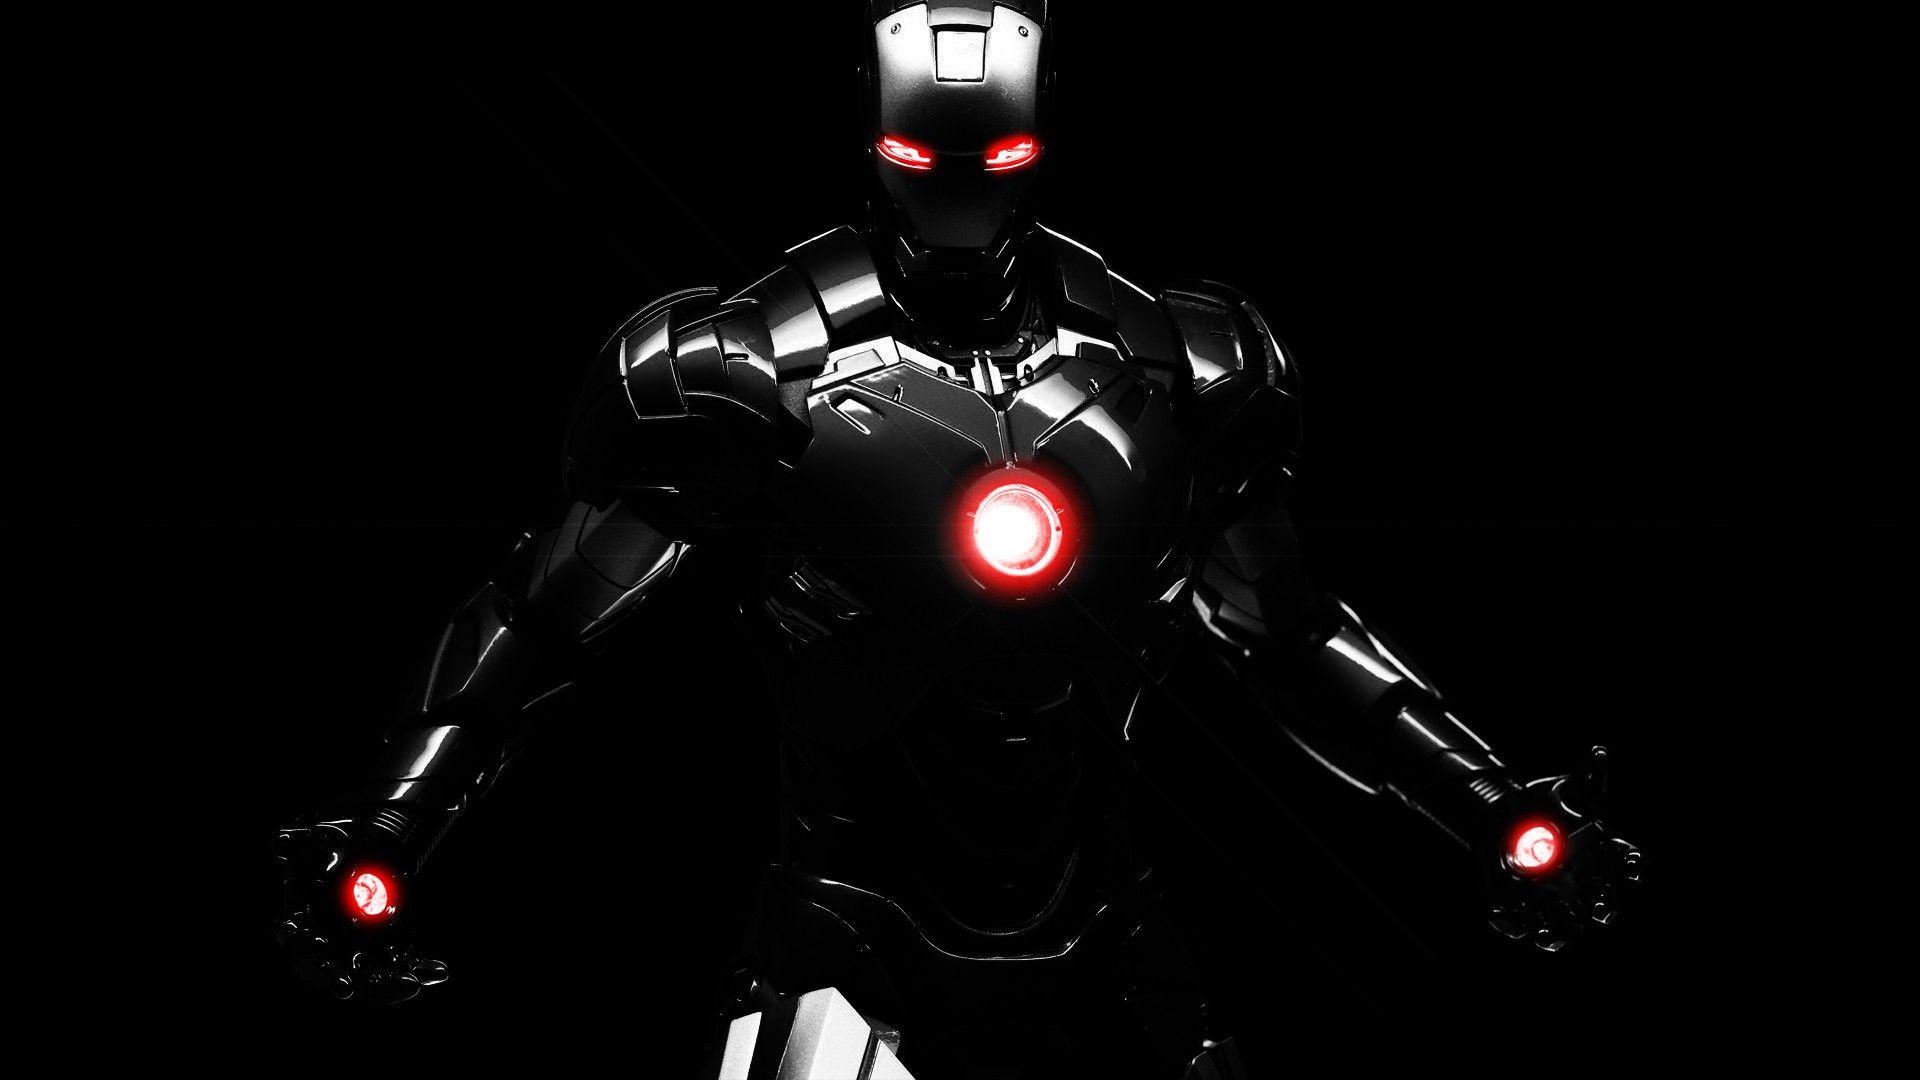 Desktop Wallpaper High Definition in 1080p with Iron Man Photo